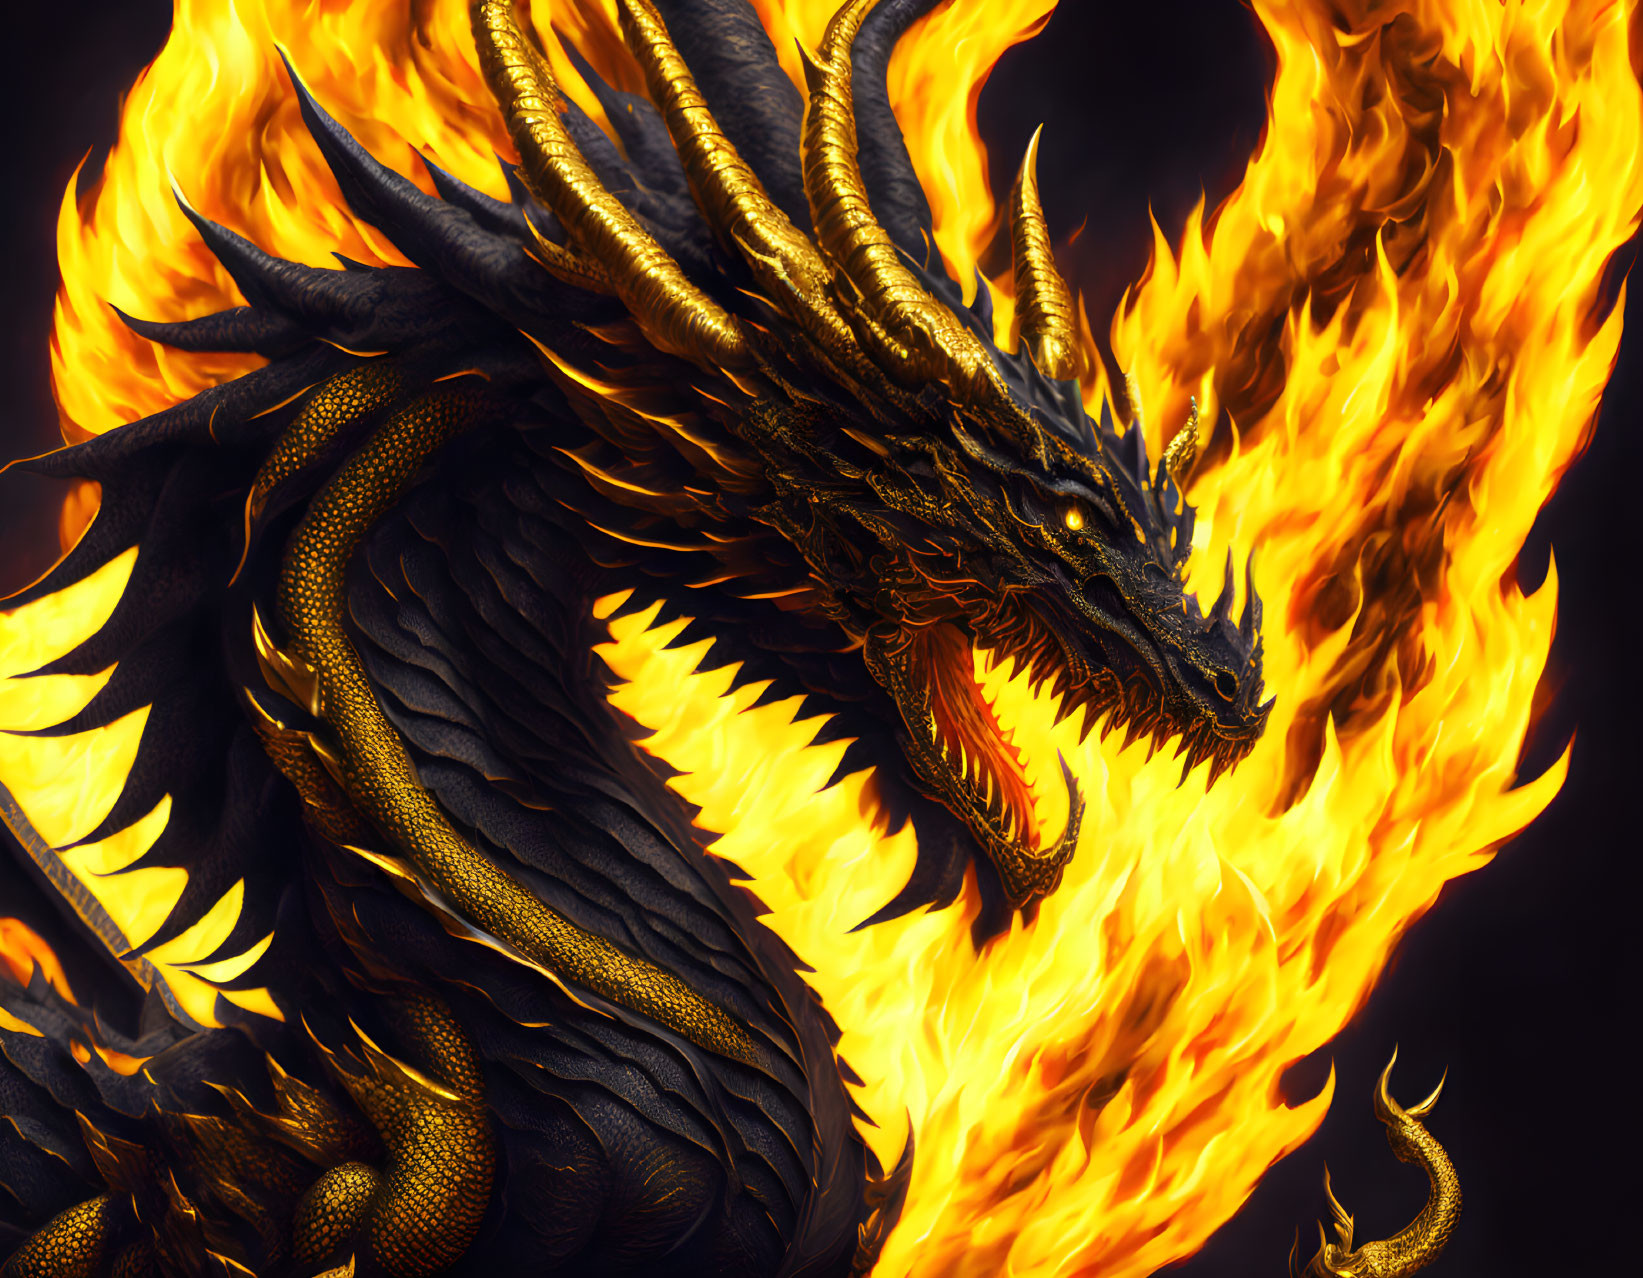 Digital Artwork: Black and Gold Dragon in Fiery Flames